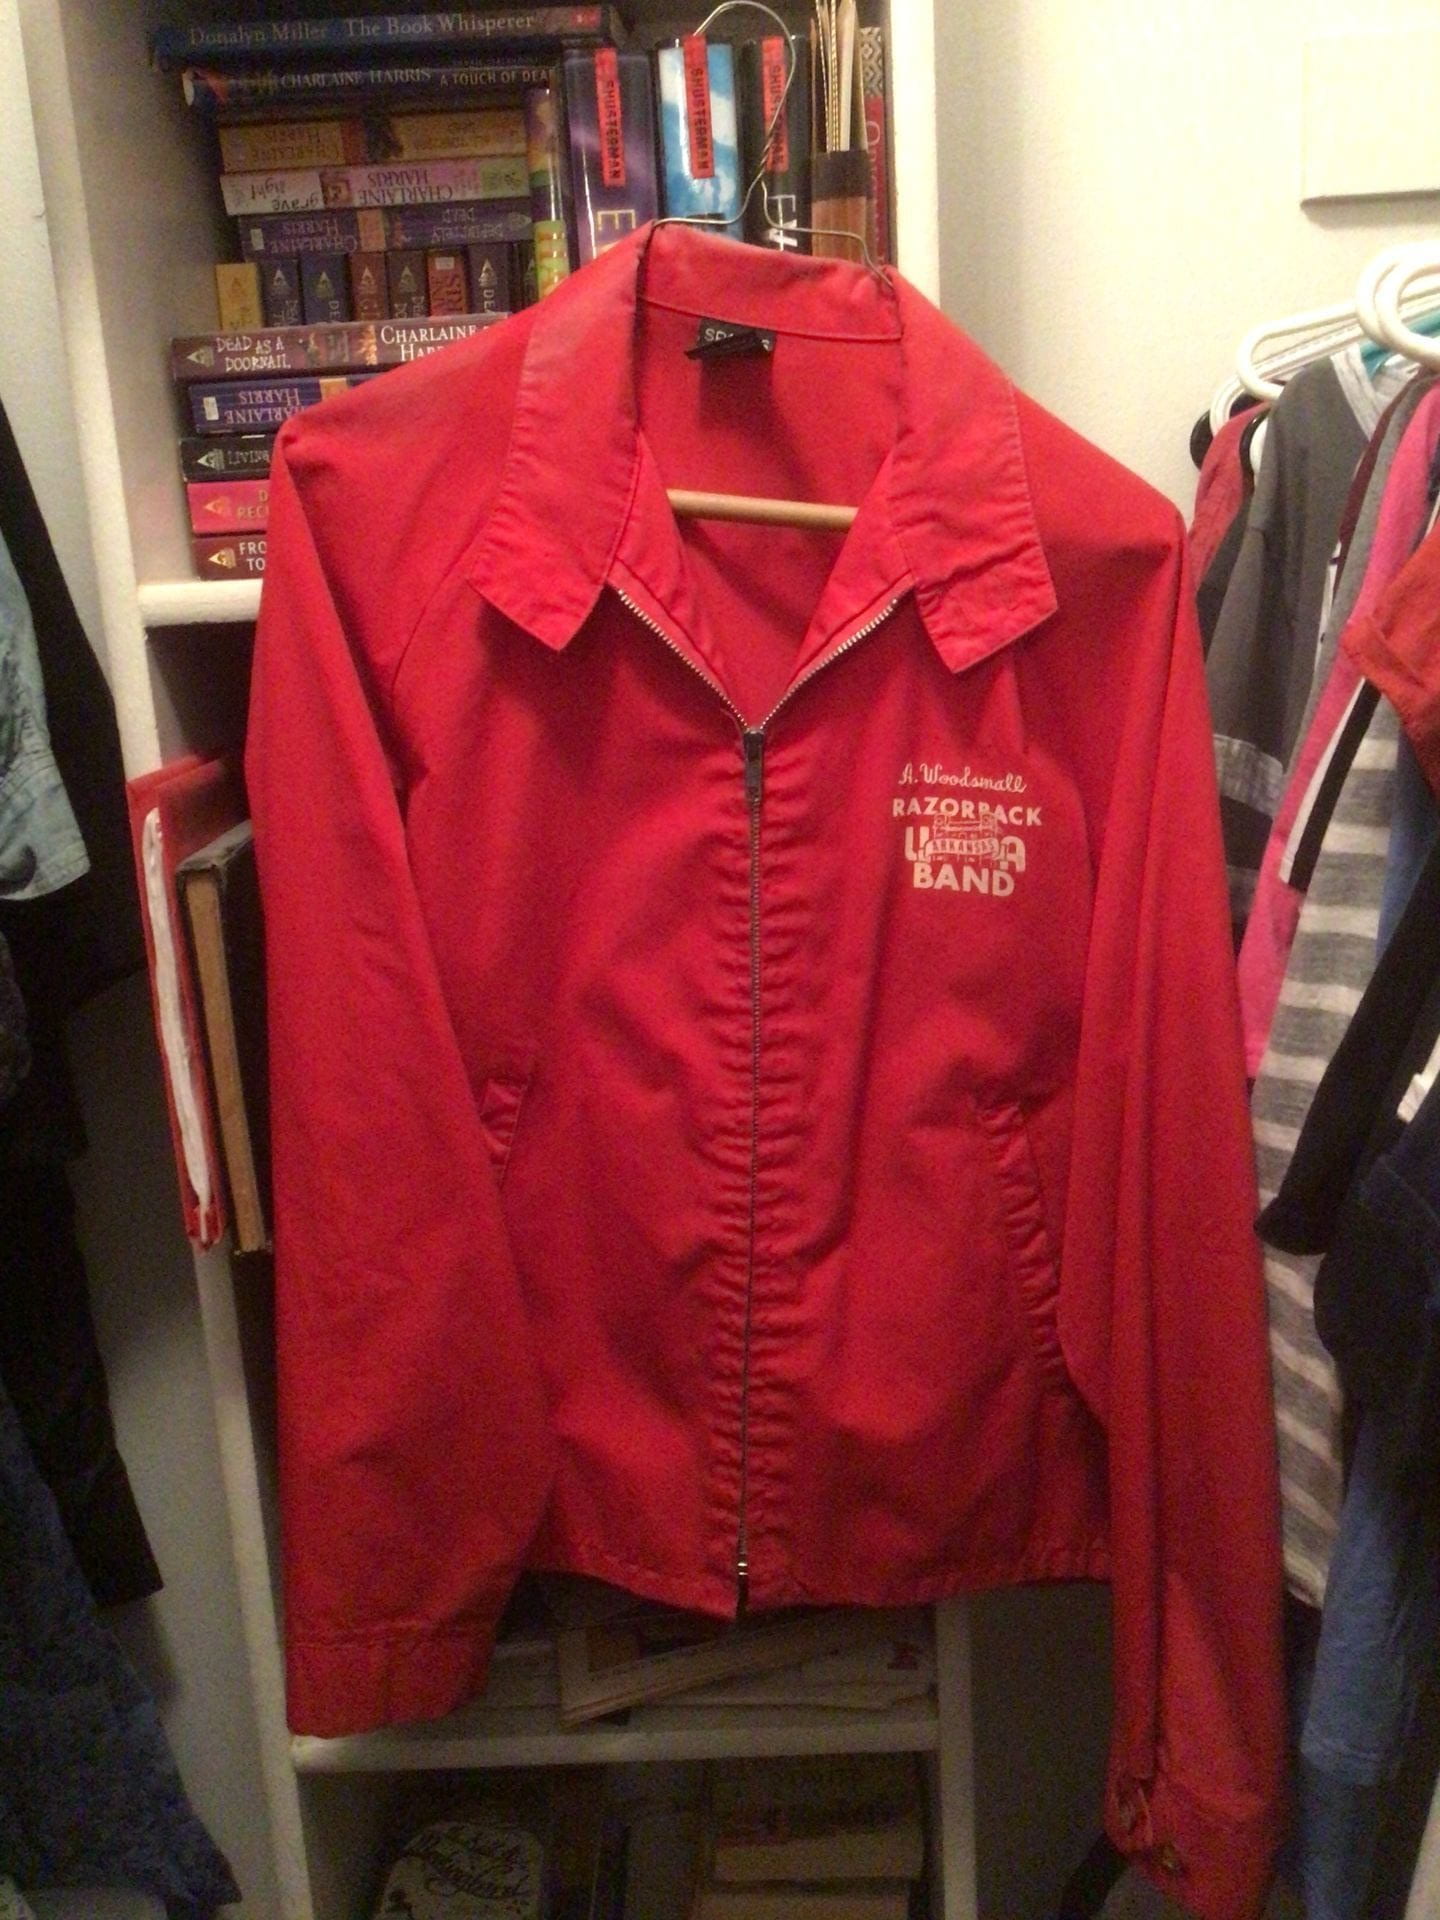 Red jacket with letters engraved in white on left side that states "A. Woodsmall UA Razorback Band." It is on a hanger in a closet and includes side pockets and a zipper.